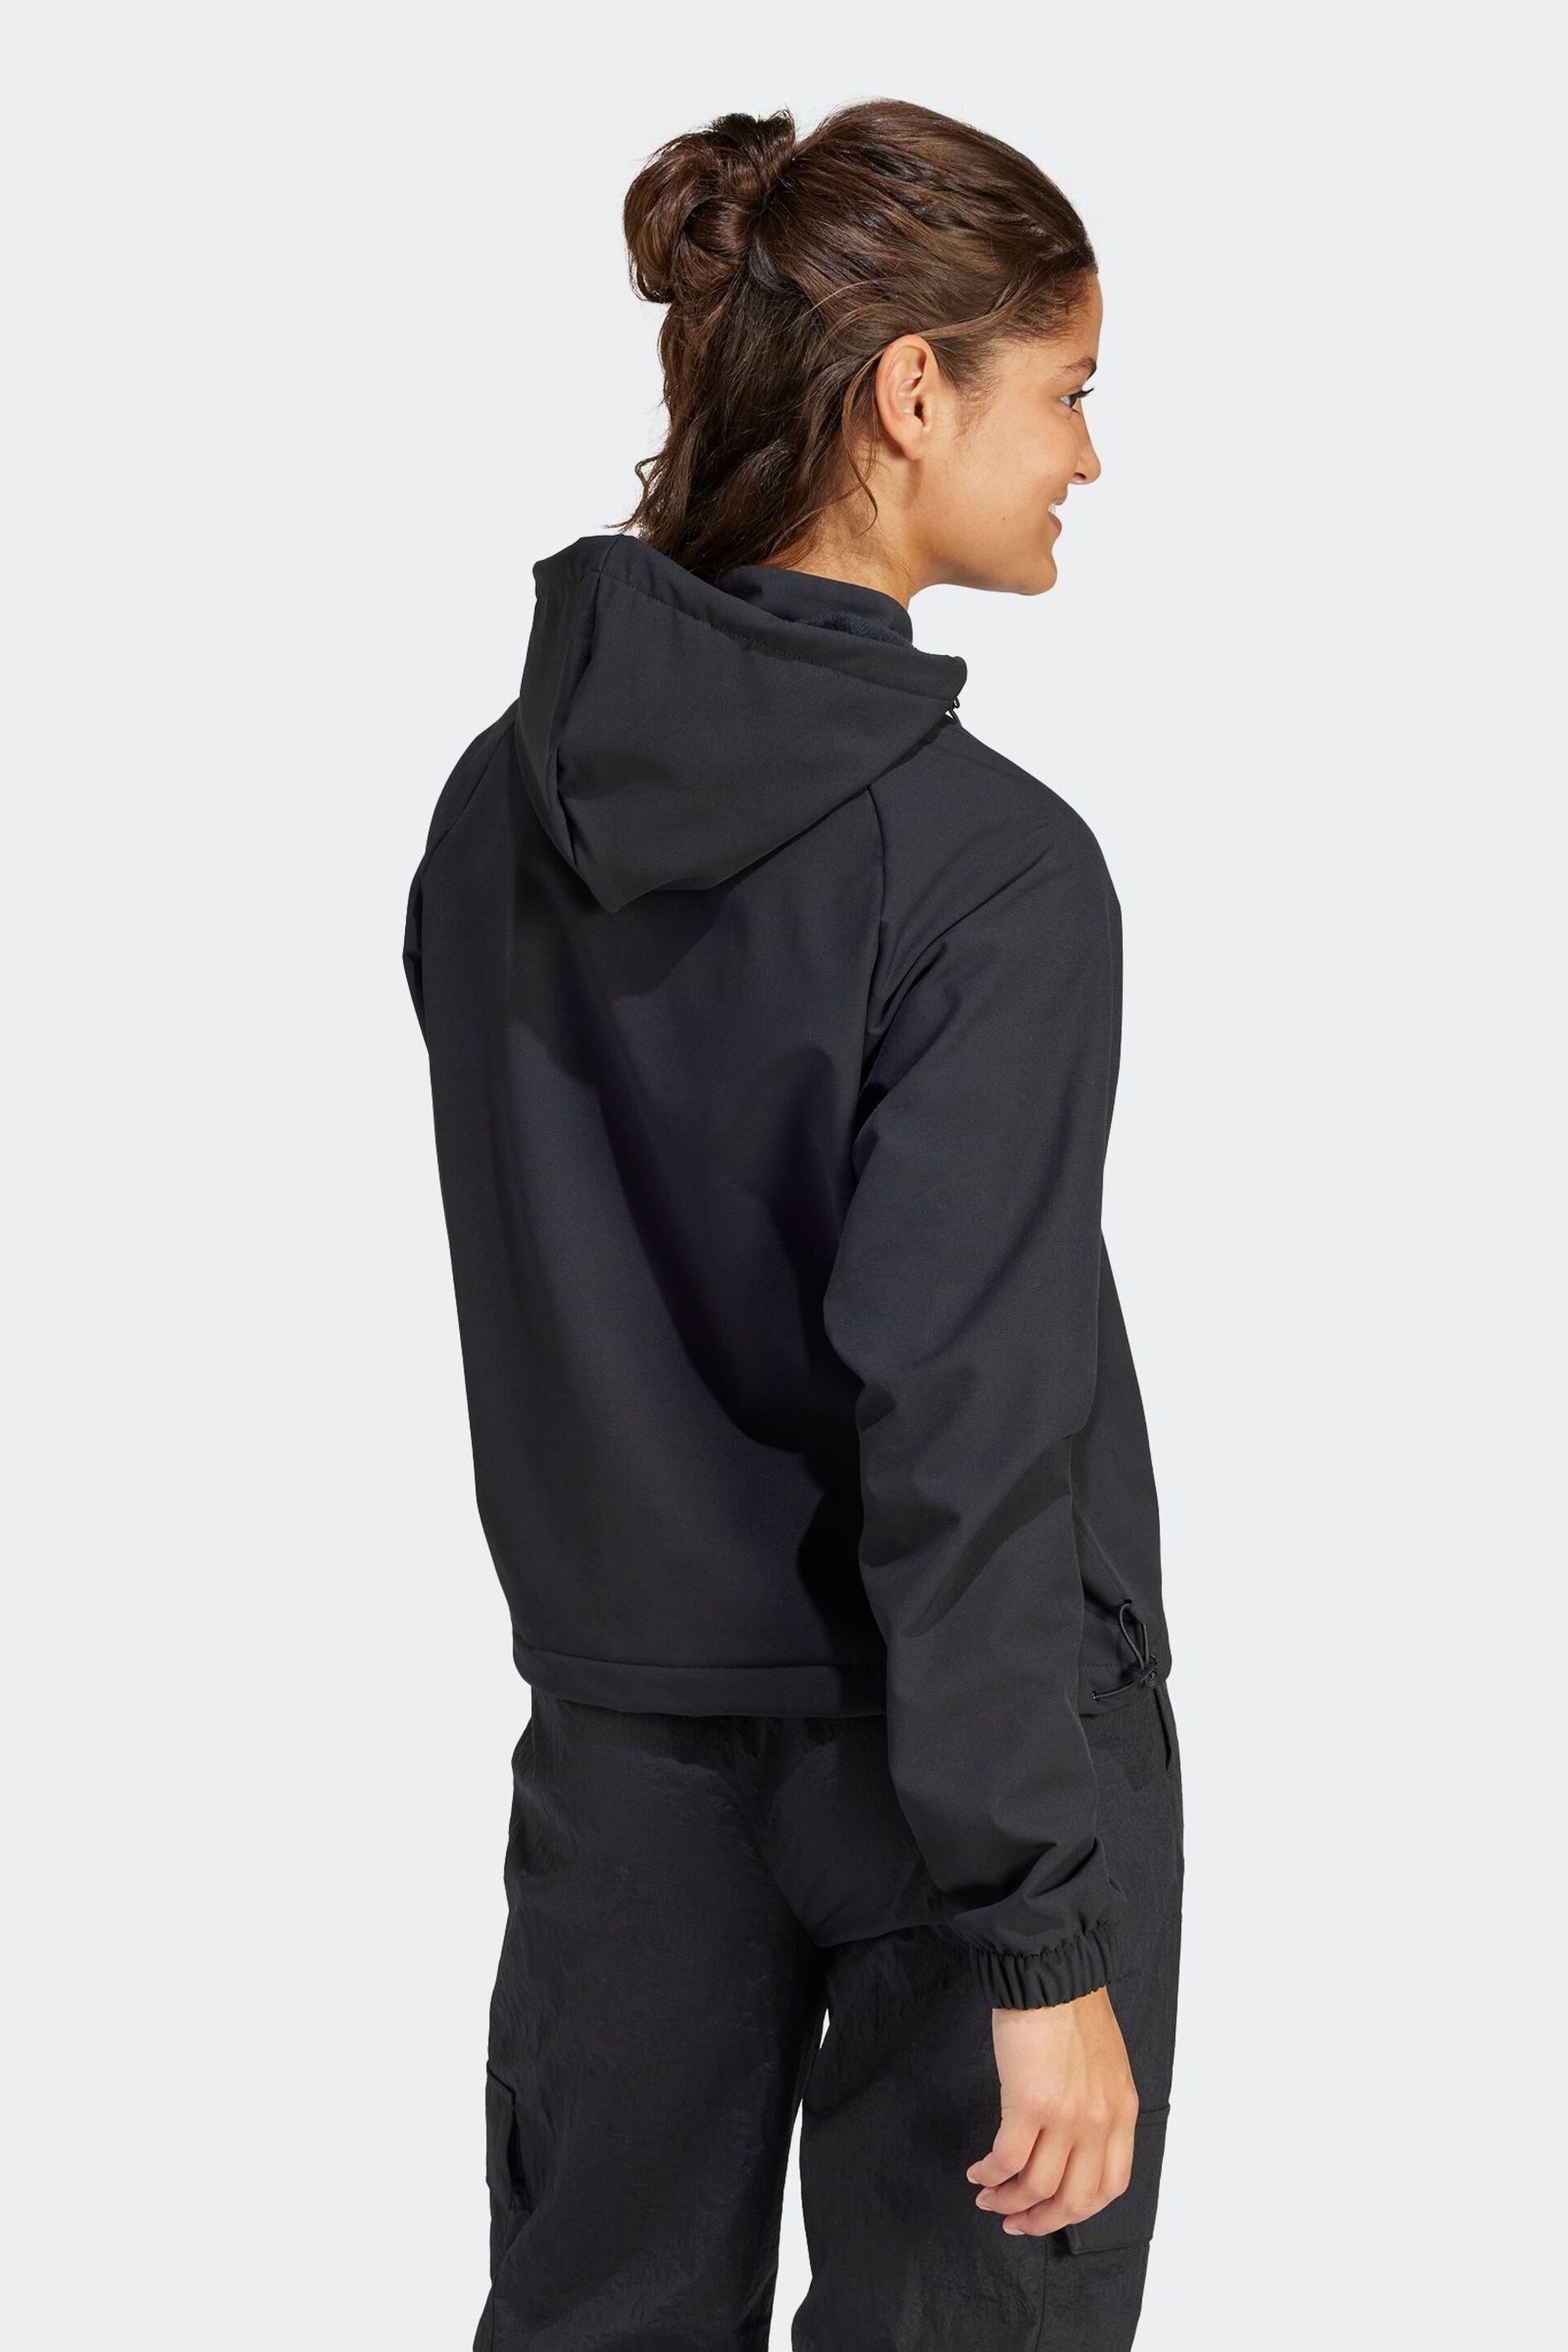 adidas Black Sportswear City Escape Hoodie With Bungee Cord - Image 2 of 7